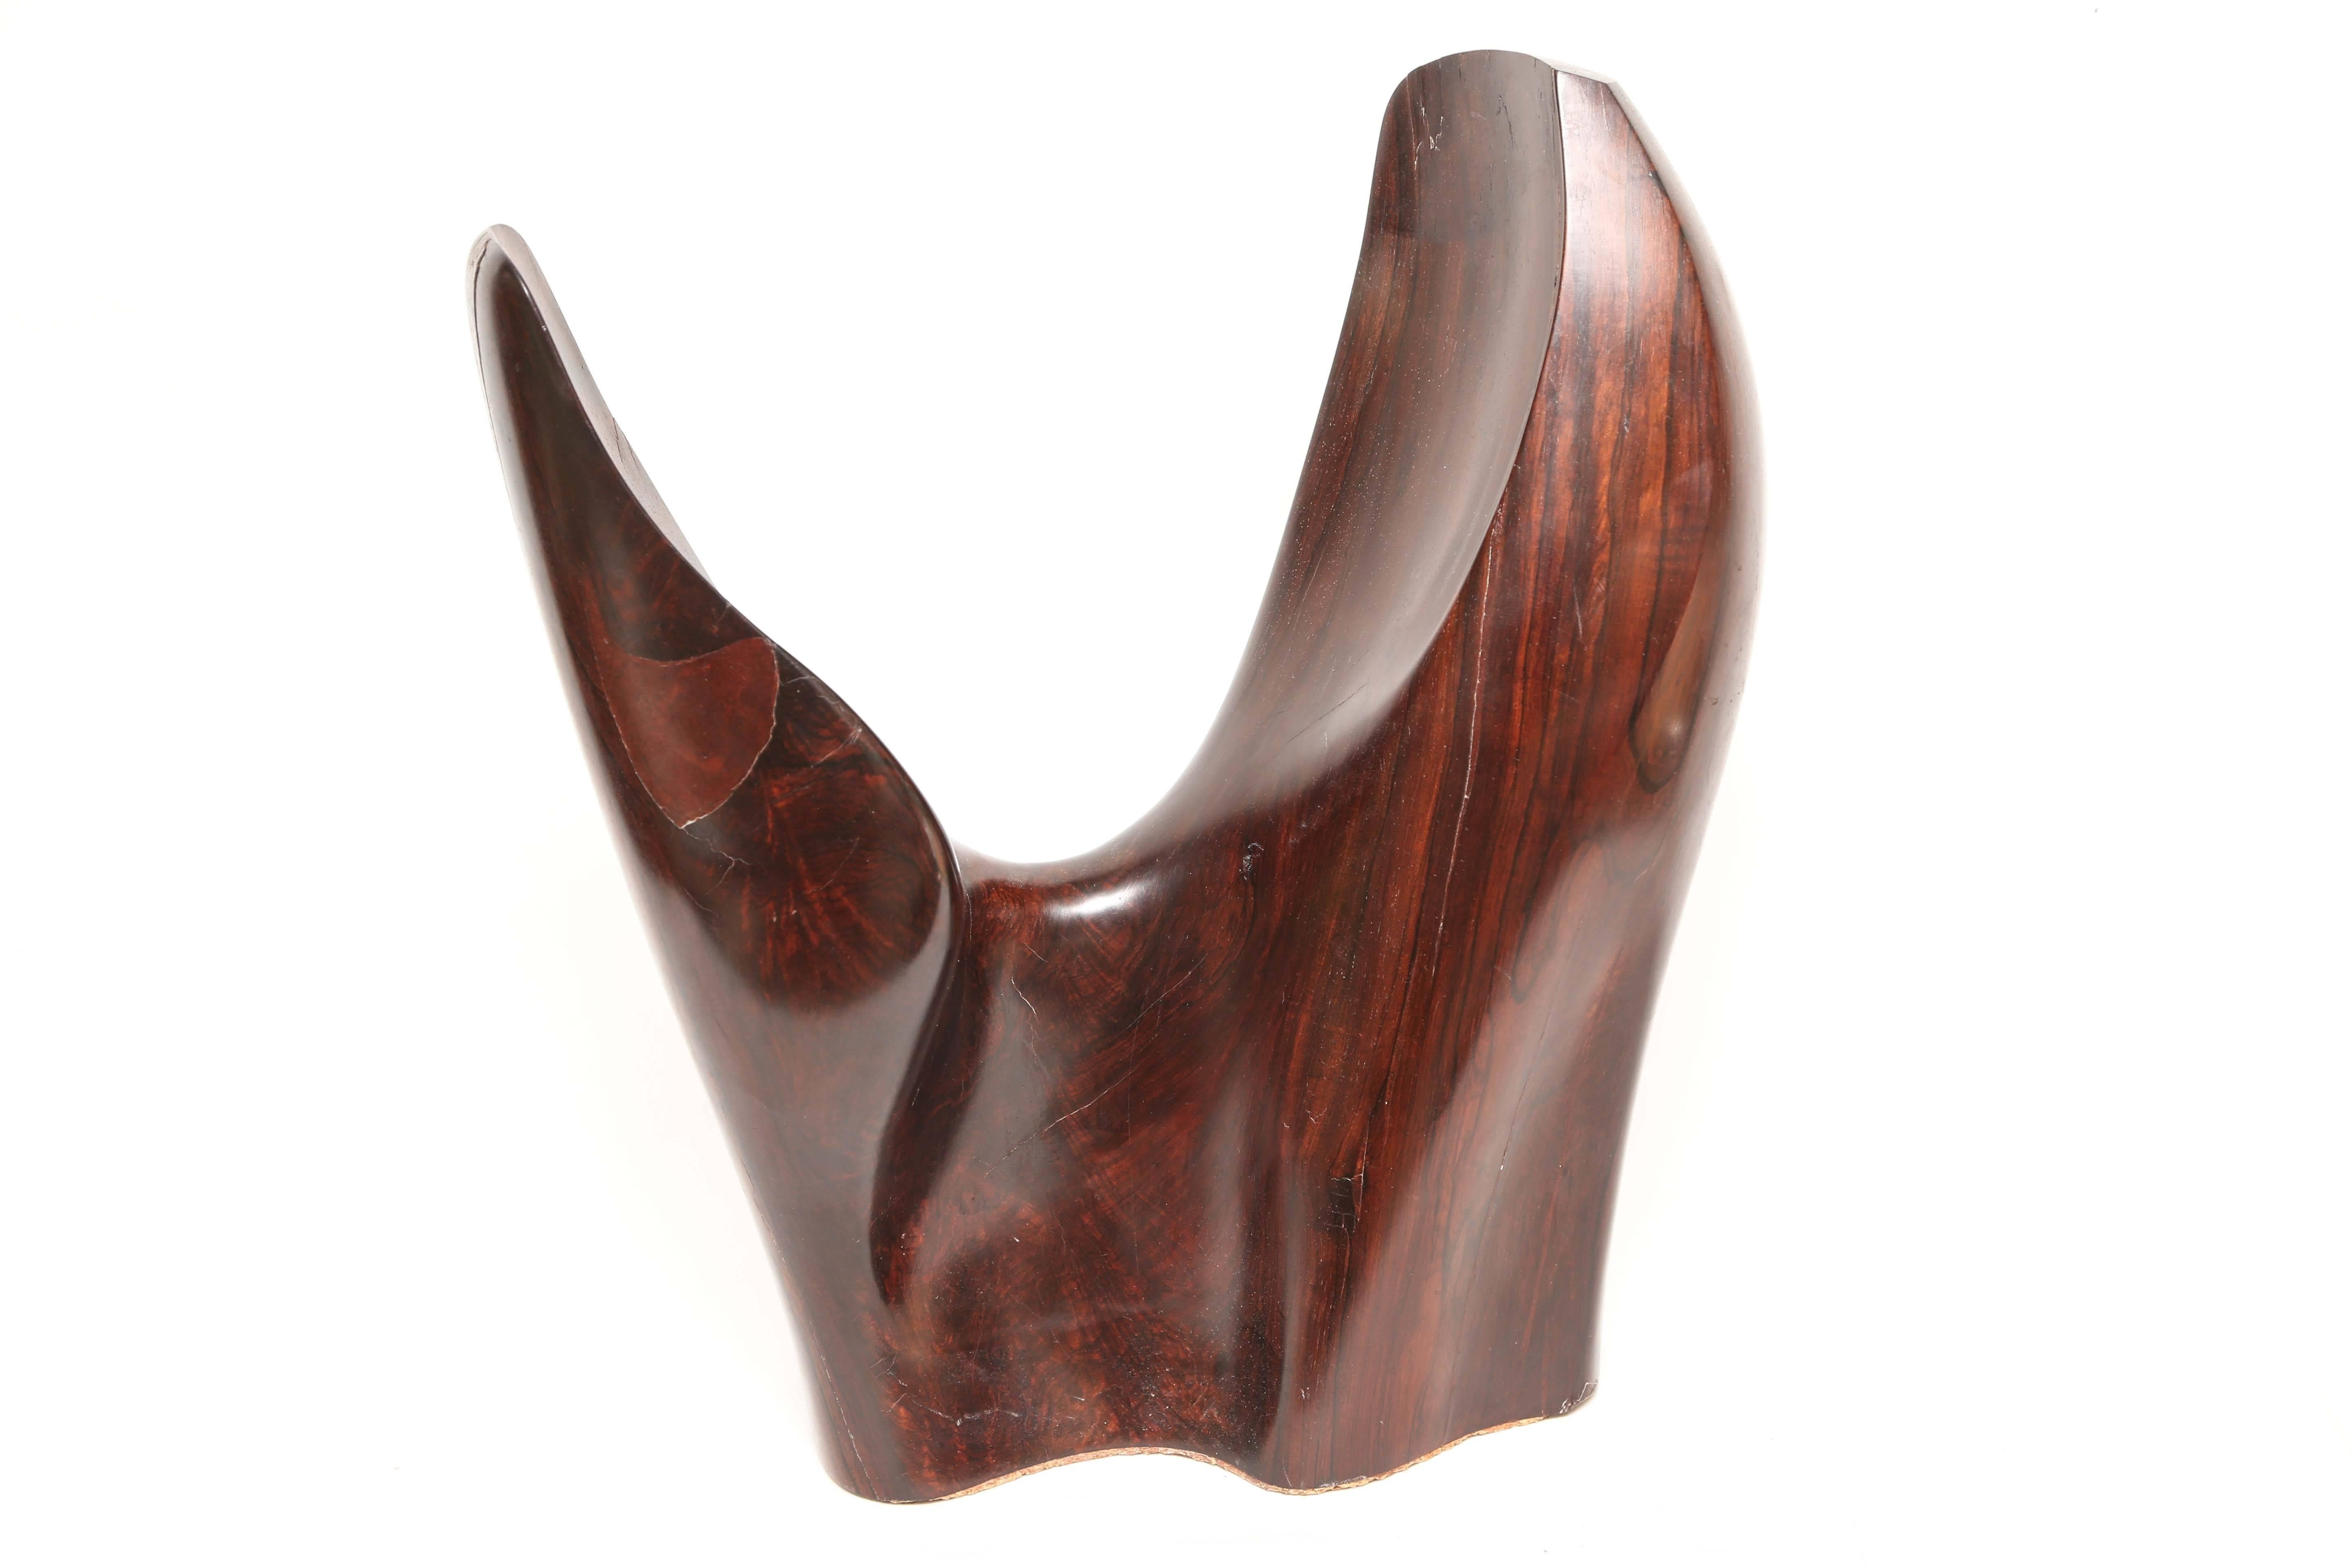 This beautiful rosewood sculpture is very much in the style of Henry Moore with its sinuous abstract shapes in a rich polished rosewood carving and though not signed or couldn't find signature you could tell a master sculptor put his talent into